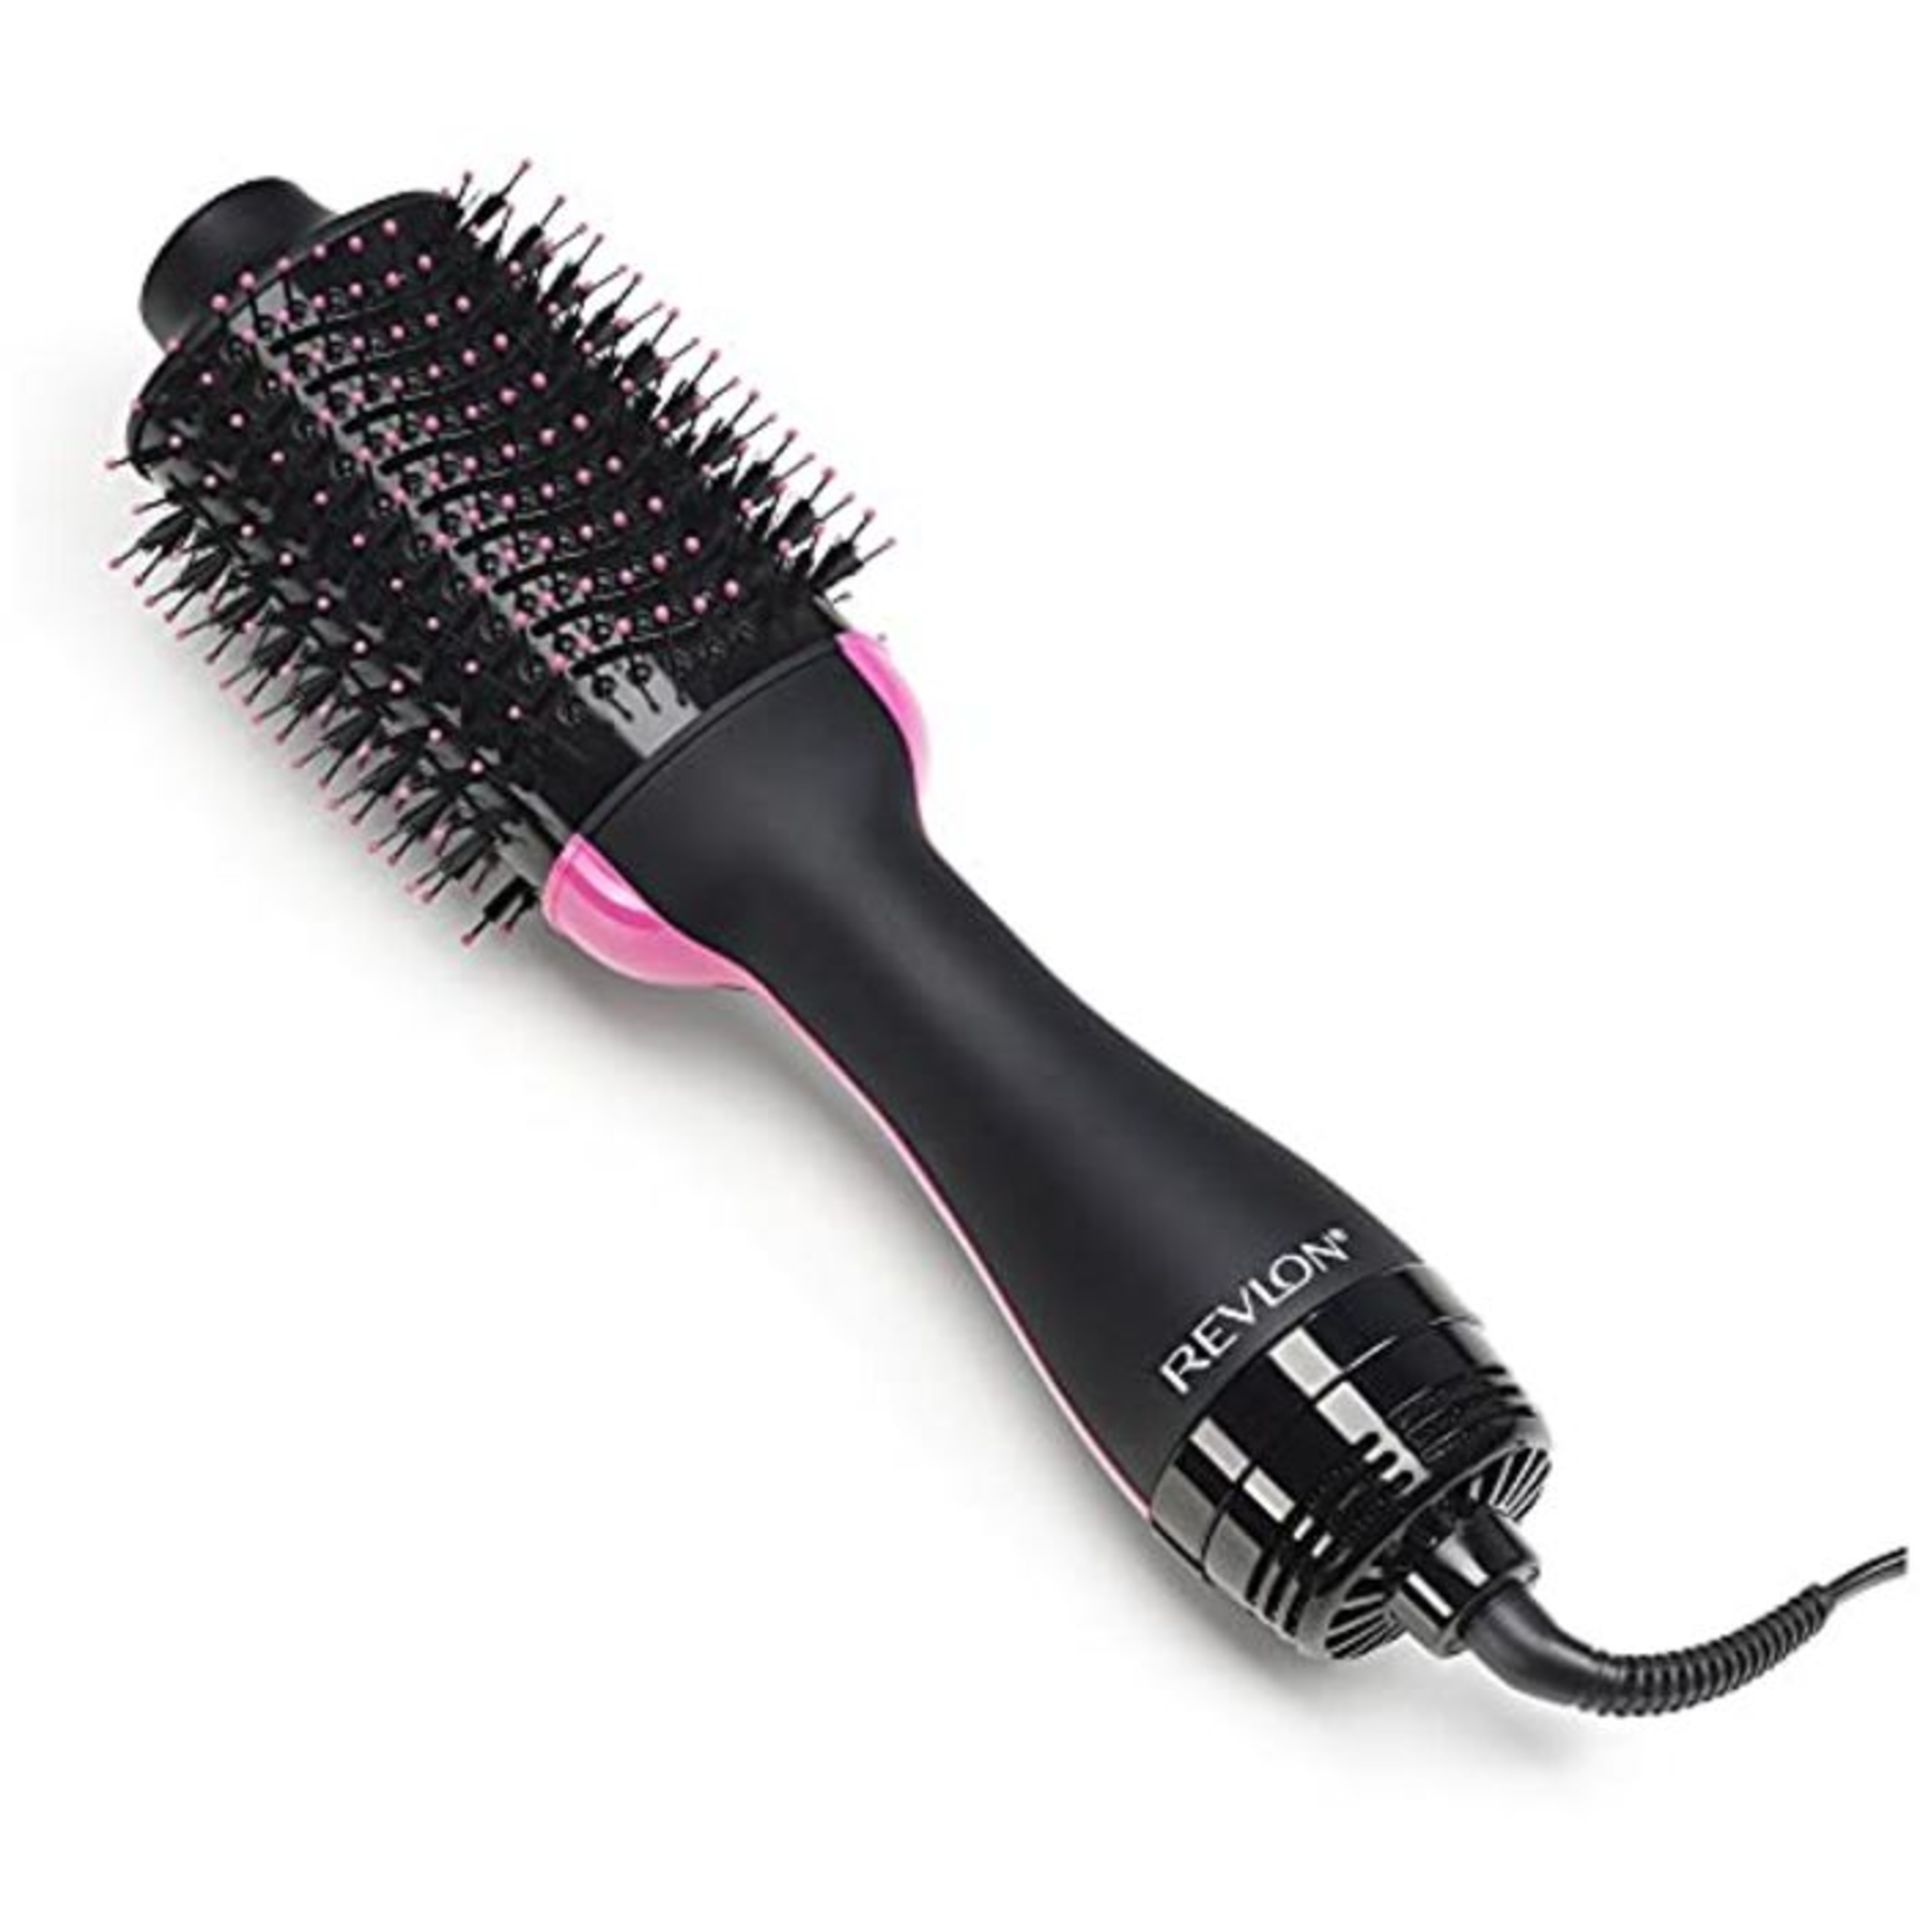 Revlon Salon One- Step Volumizer for mid to long hair (2-in-1 styling tool, dryer and